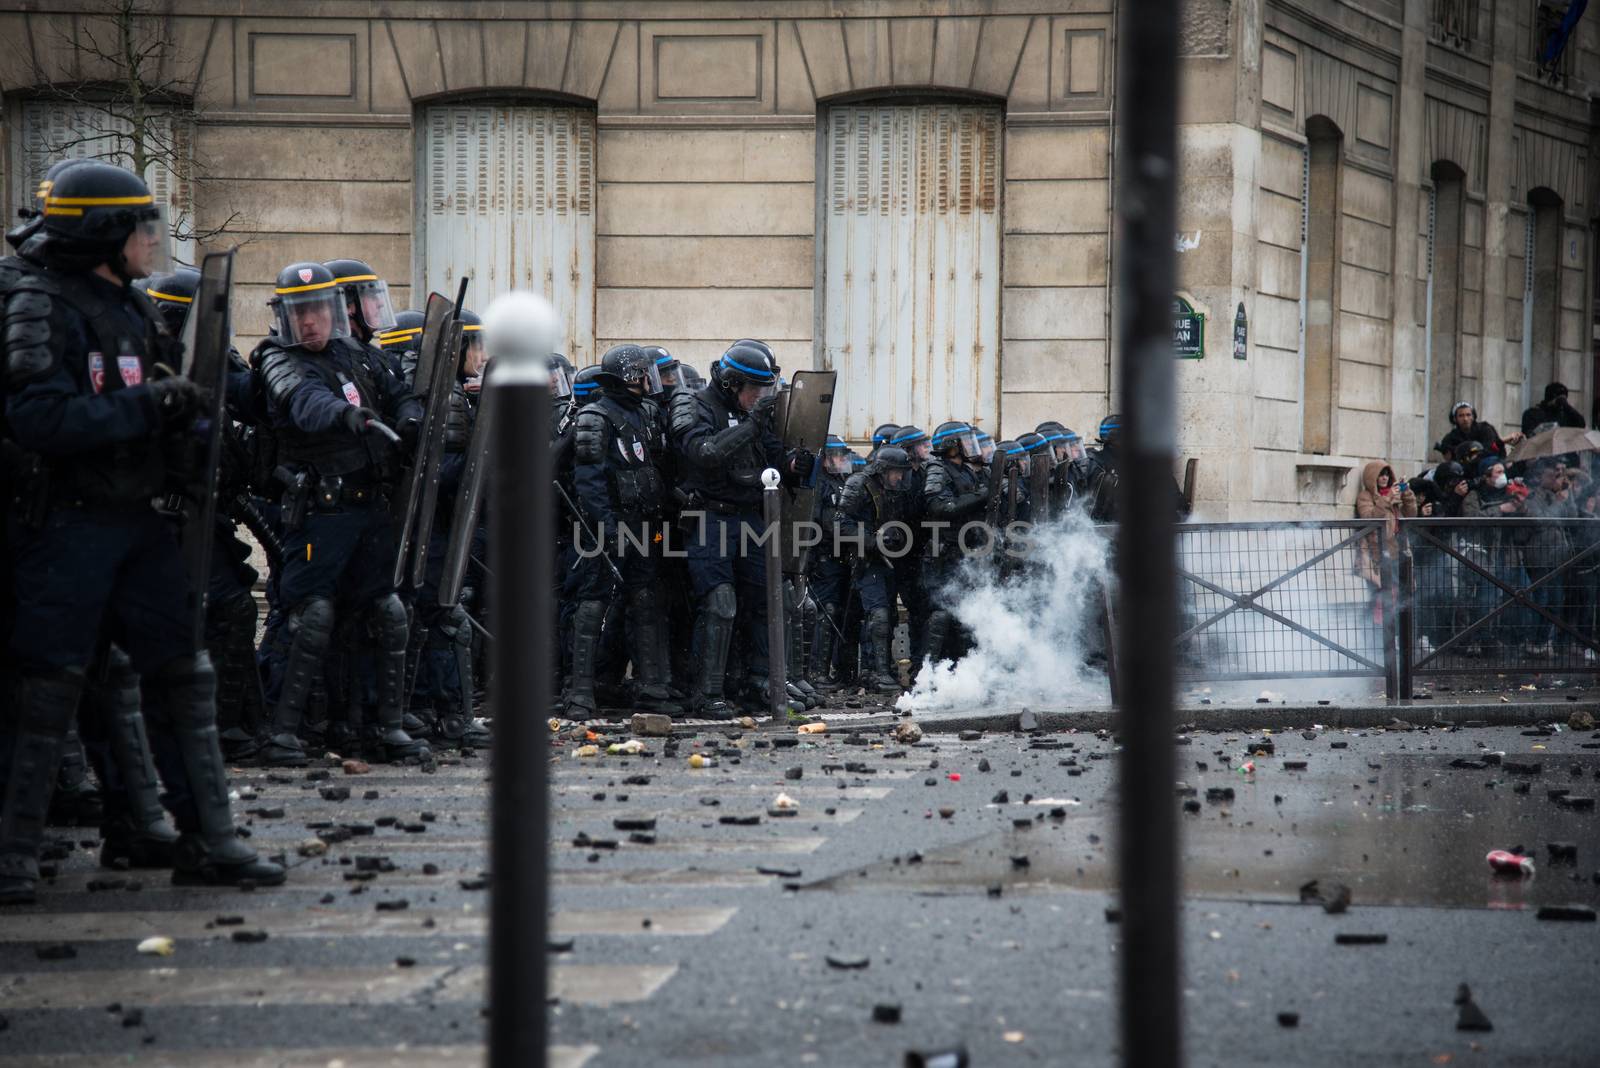 FRANCE, Paris: Riot policemen stand in line during a demo on April 9, 2016 in Paris, against the French government's proposed labour law reforms.